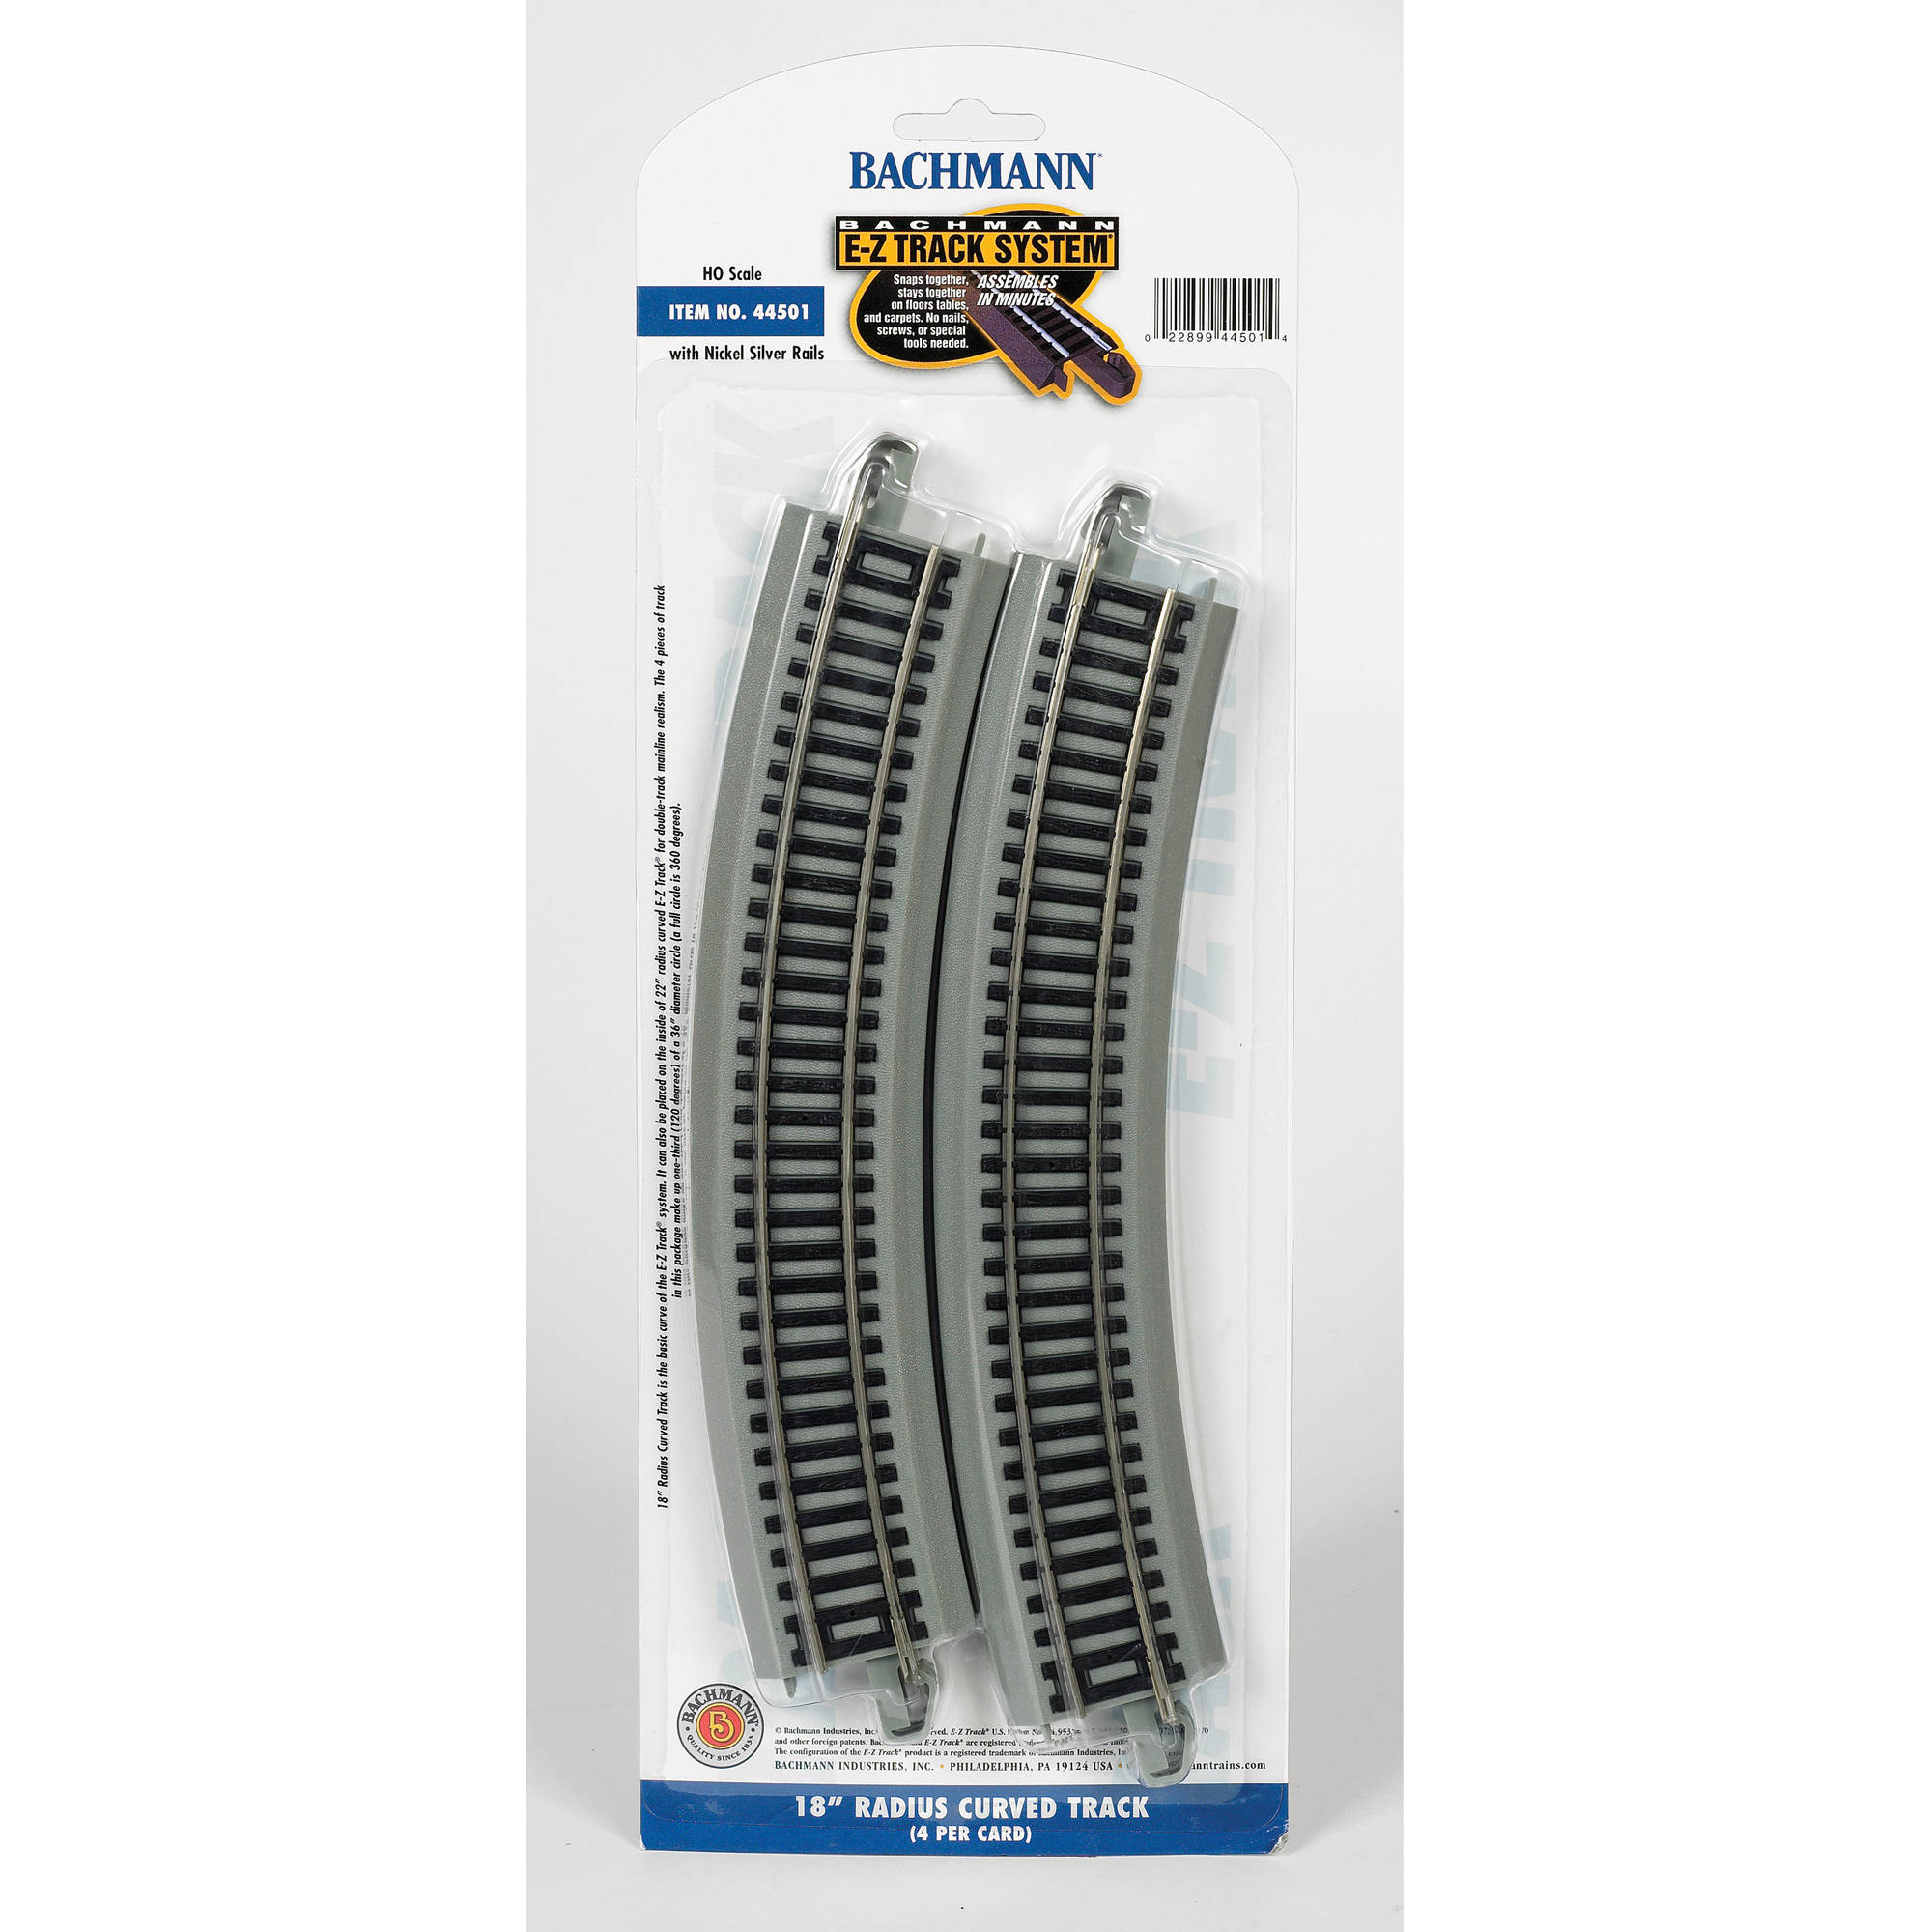 Bachmann Trains HO Scale 18" Radius Curved Nickel Silver E-Z Track - 4 Pack - image 1 of 2